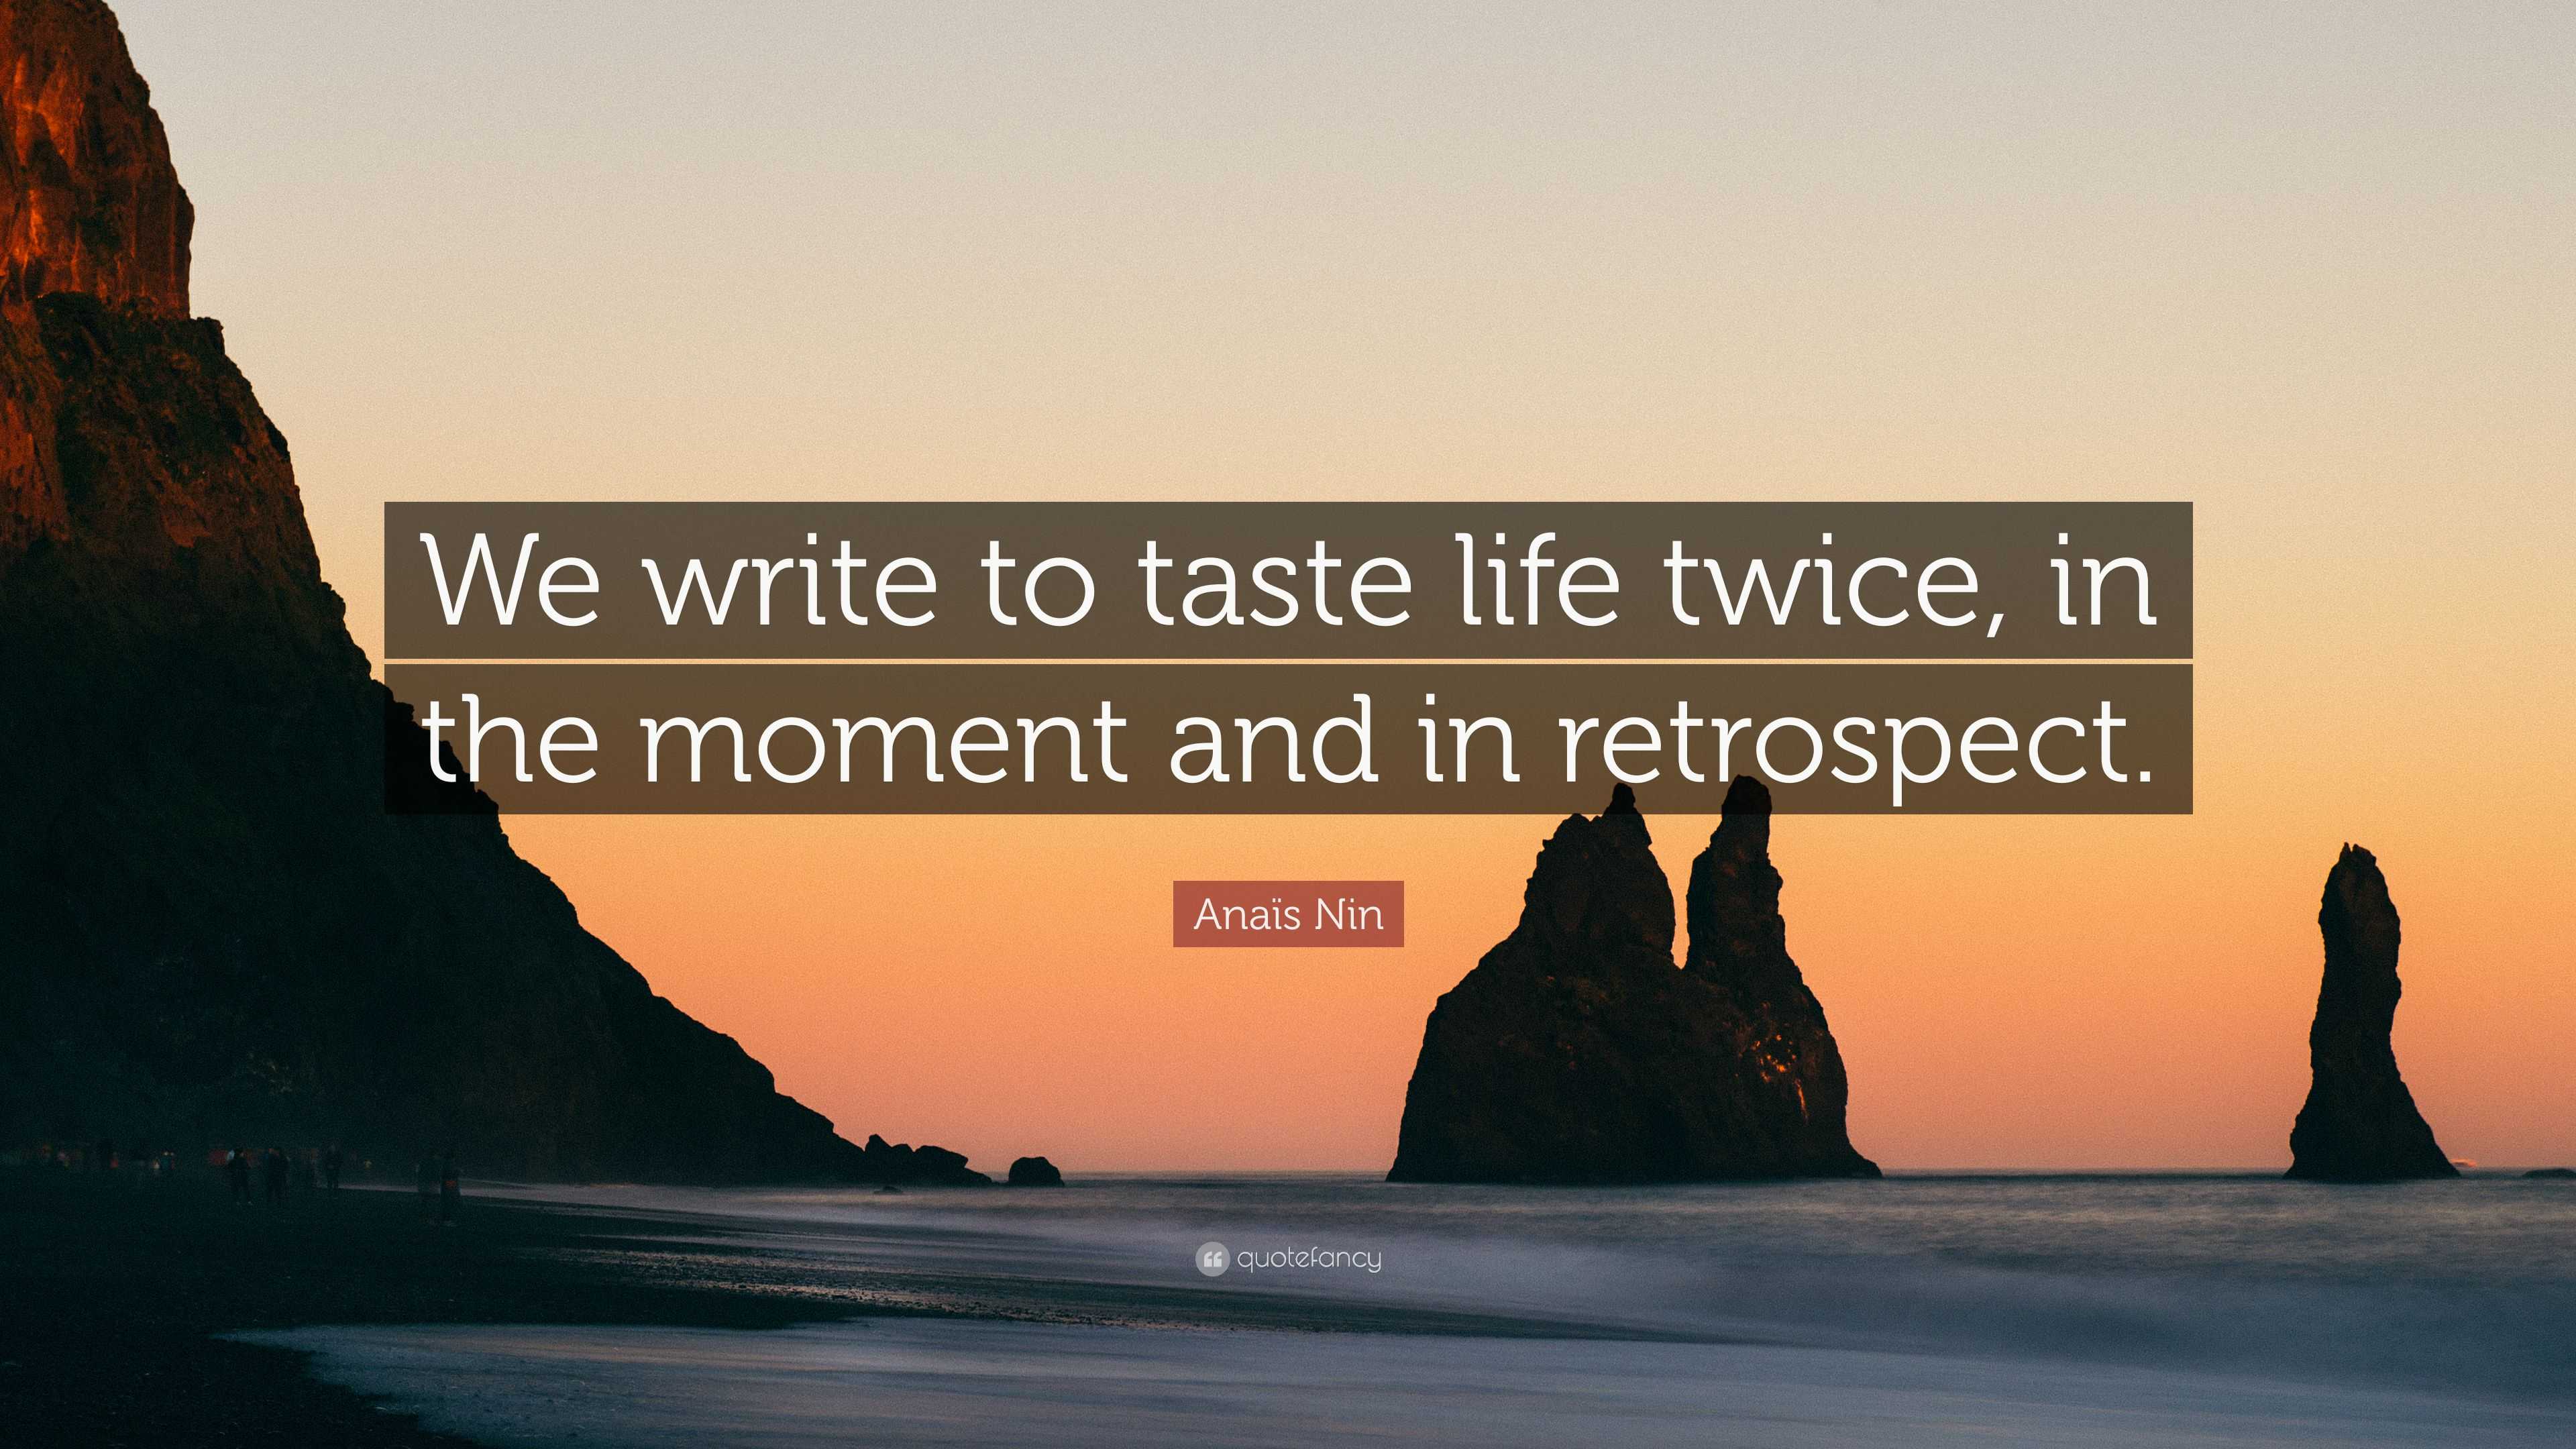 https://quotefancy.com/media/wallpaper/3840x2160/2015612-Ana-s-Nin-Quote-We-write-to-taste-life-twice-in-the-moment-and-in.jpg